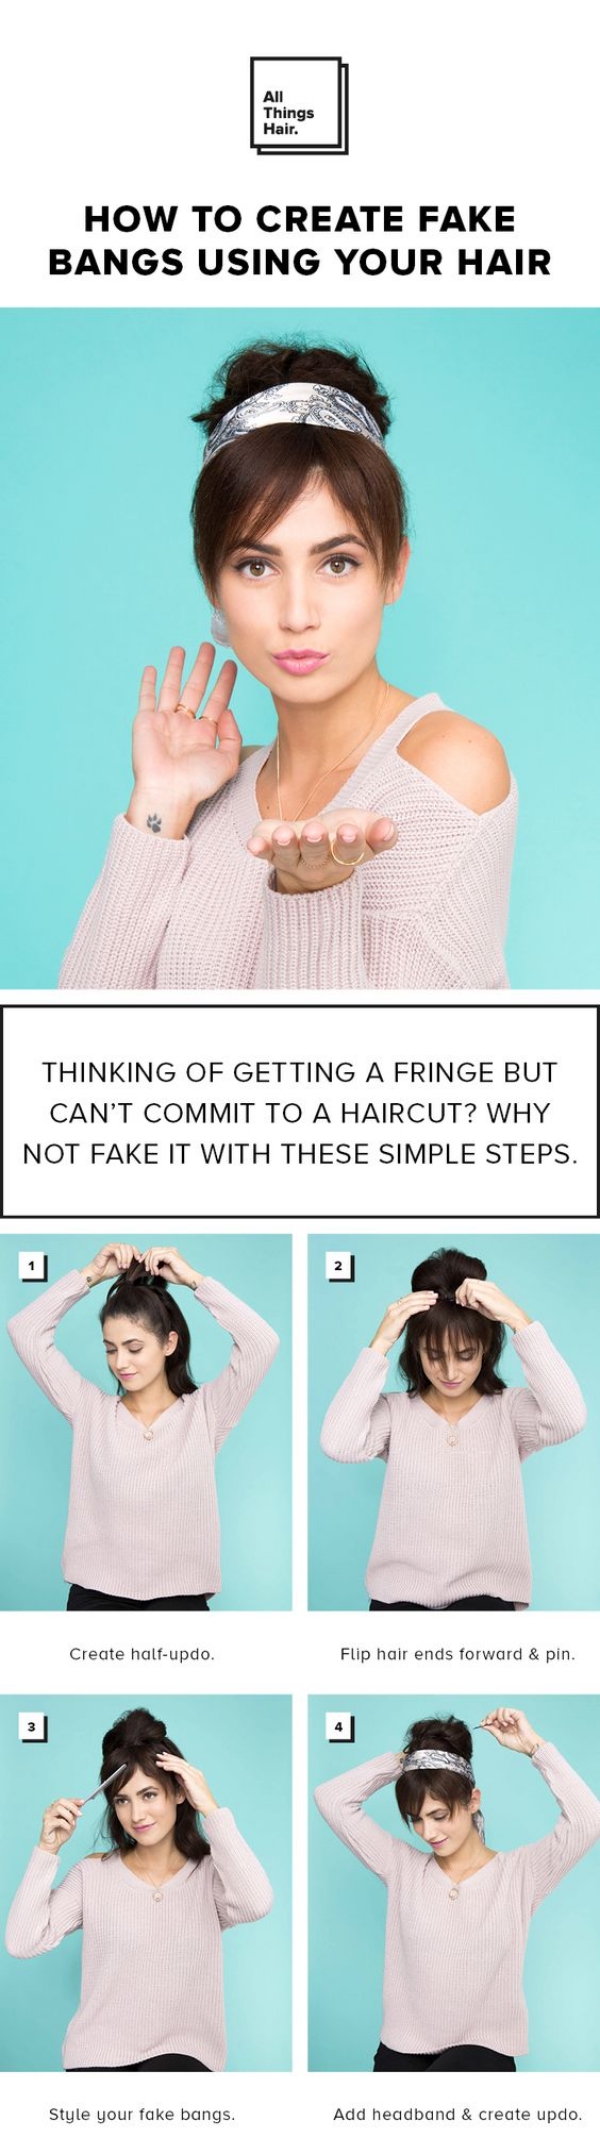 Hairstyles-That-Can-be-Done-in-3-Minutes